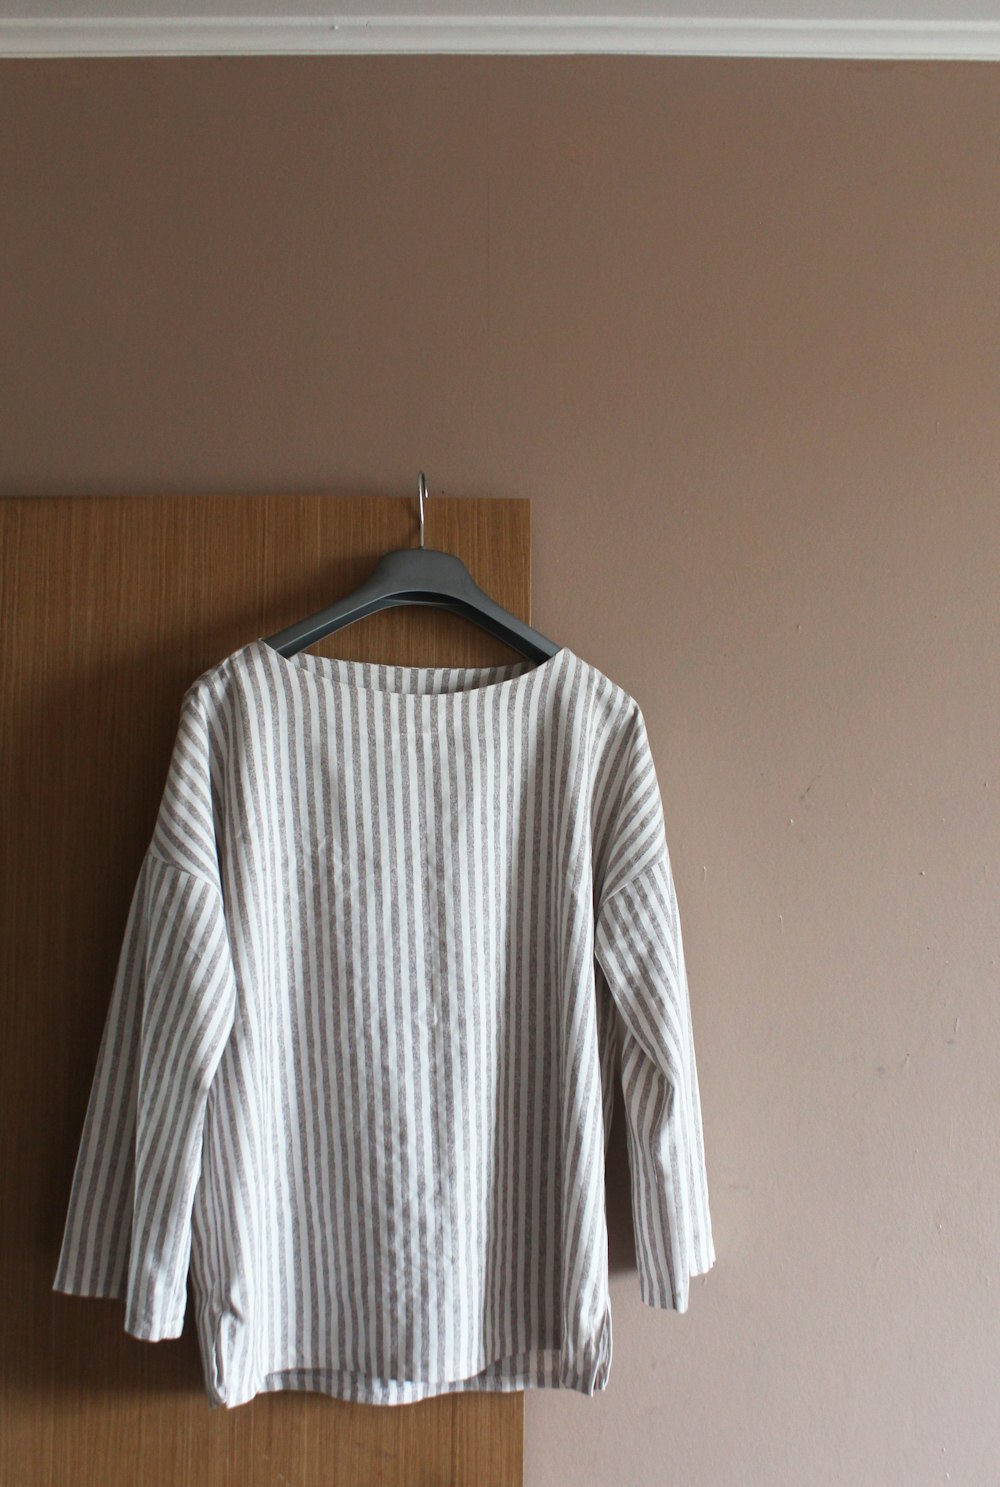 white and black striped long sleeve shirt